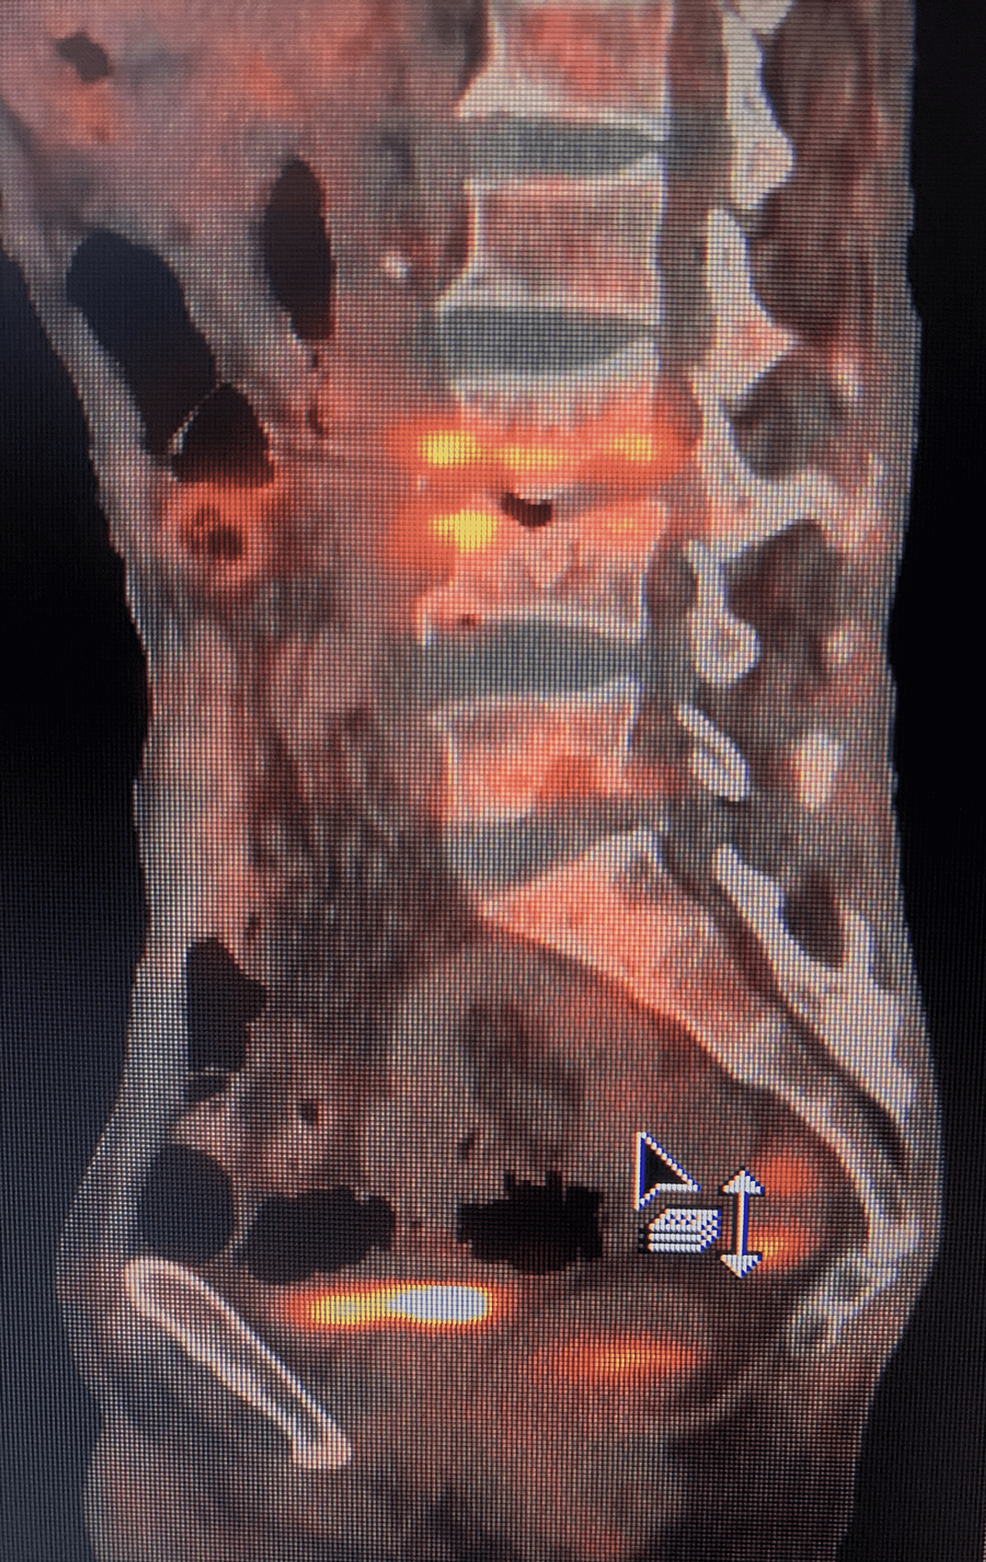 FDG-PET/CT-of-the-spine